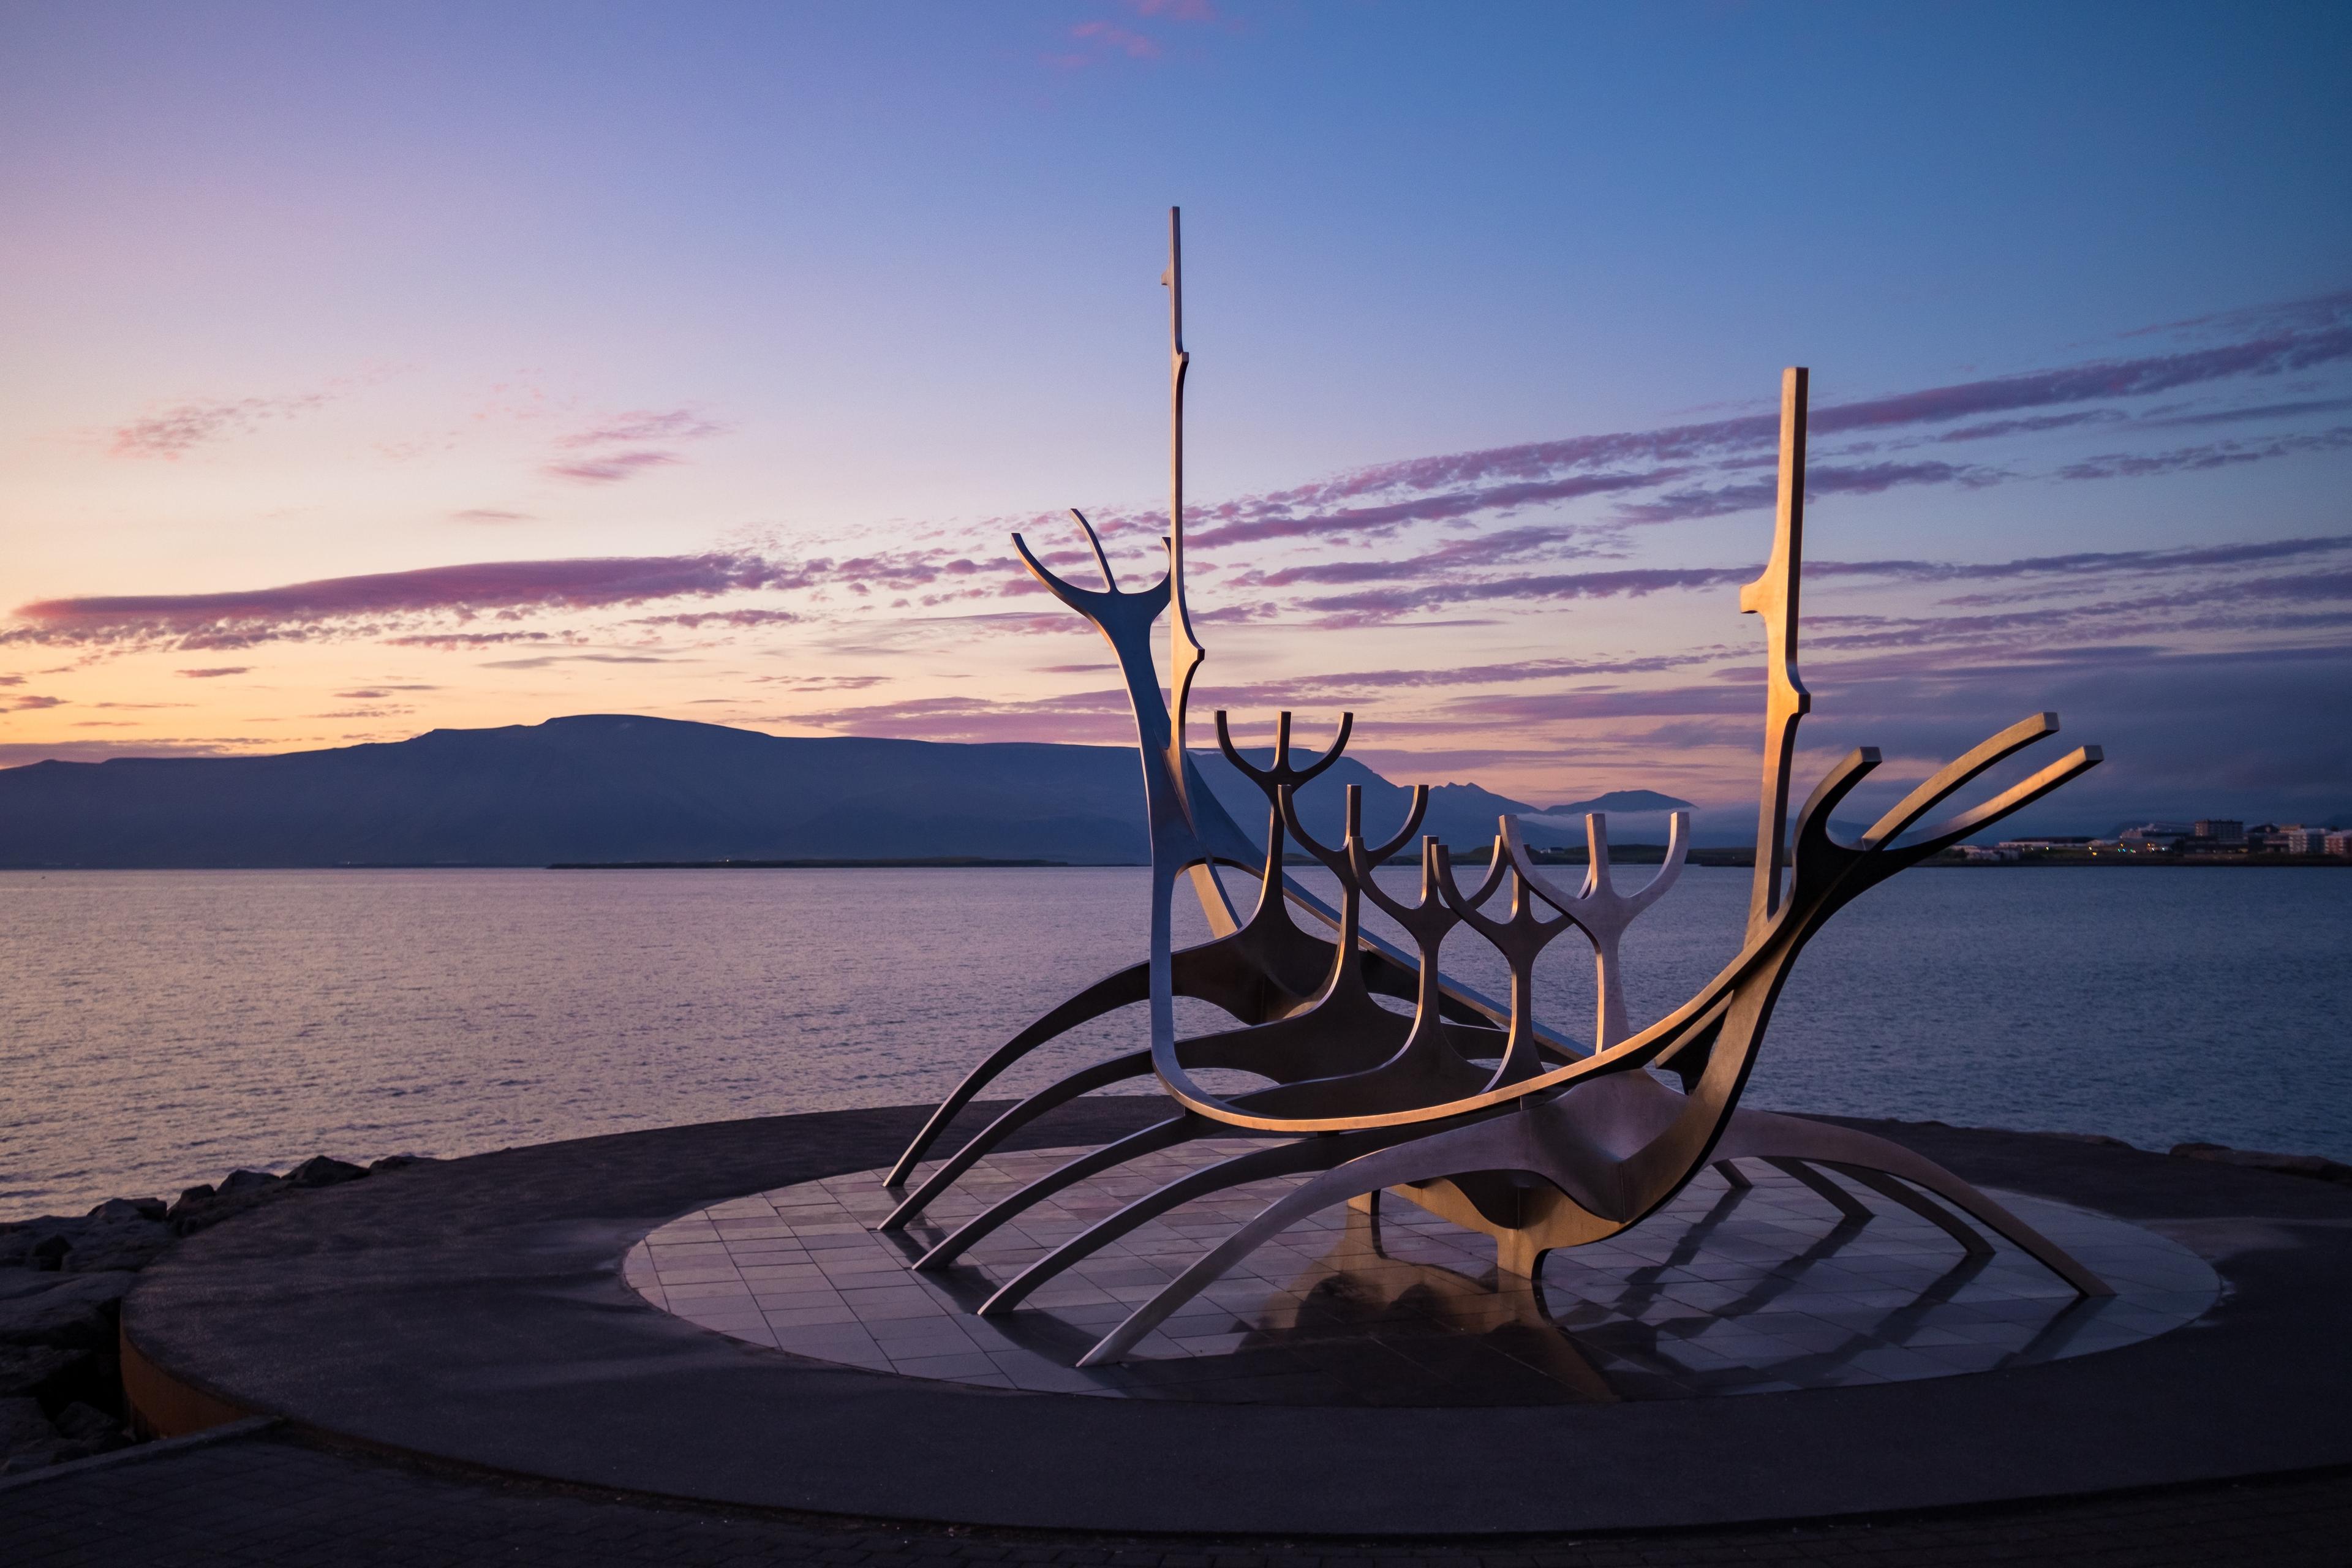 The Sun Voyager statue on the sea coast in Reykjavik